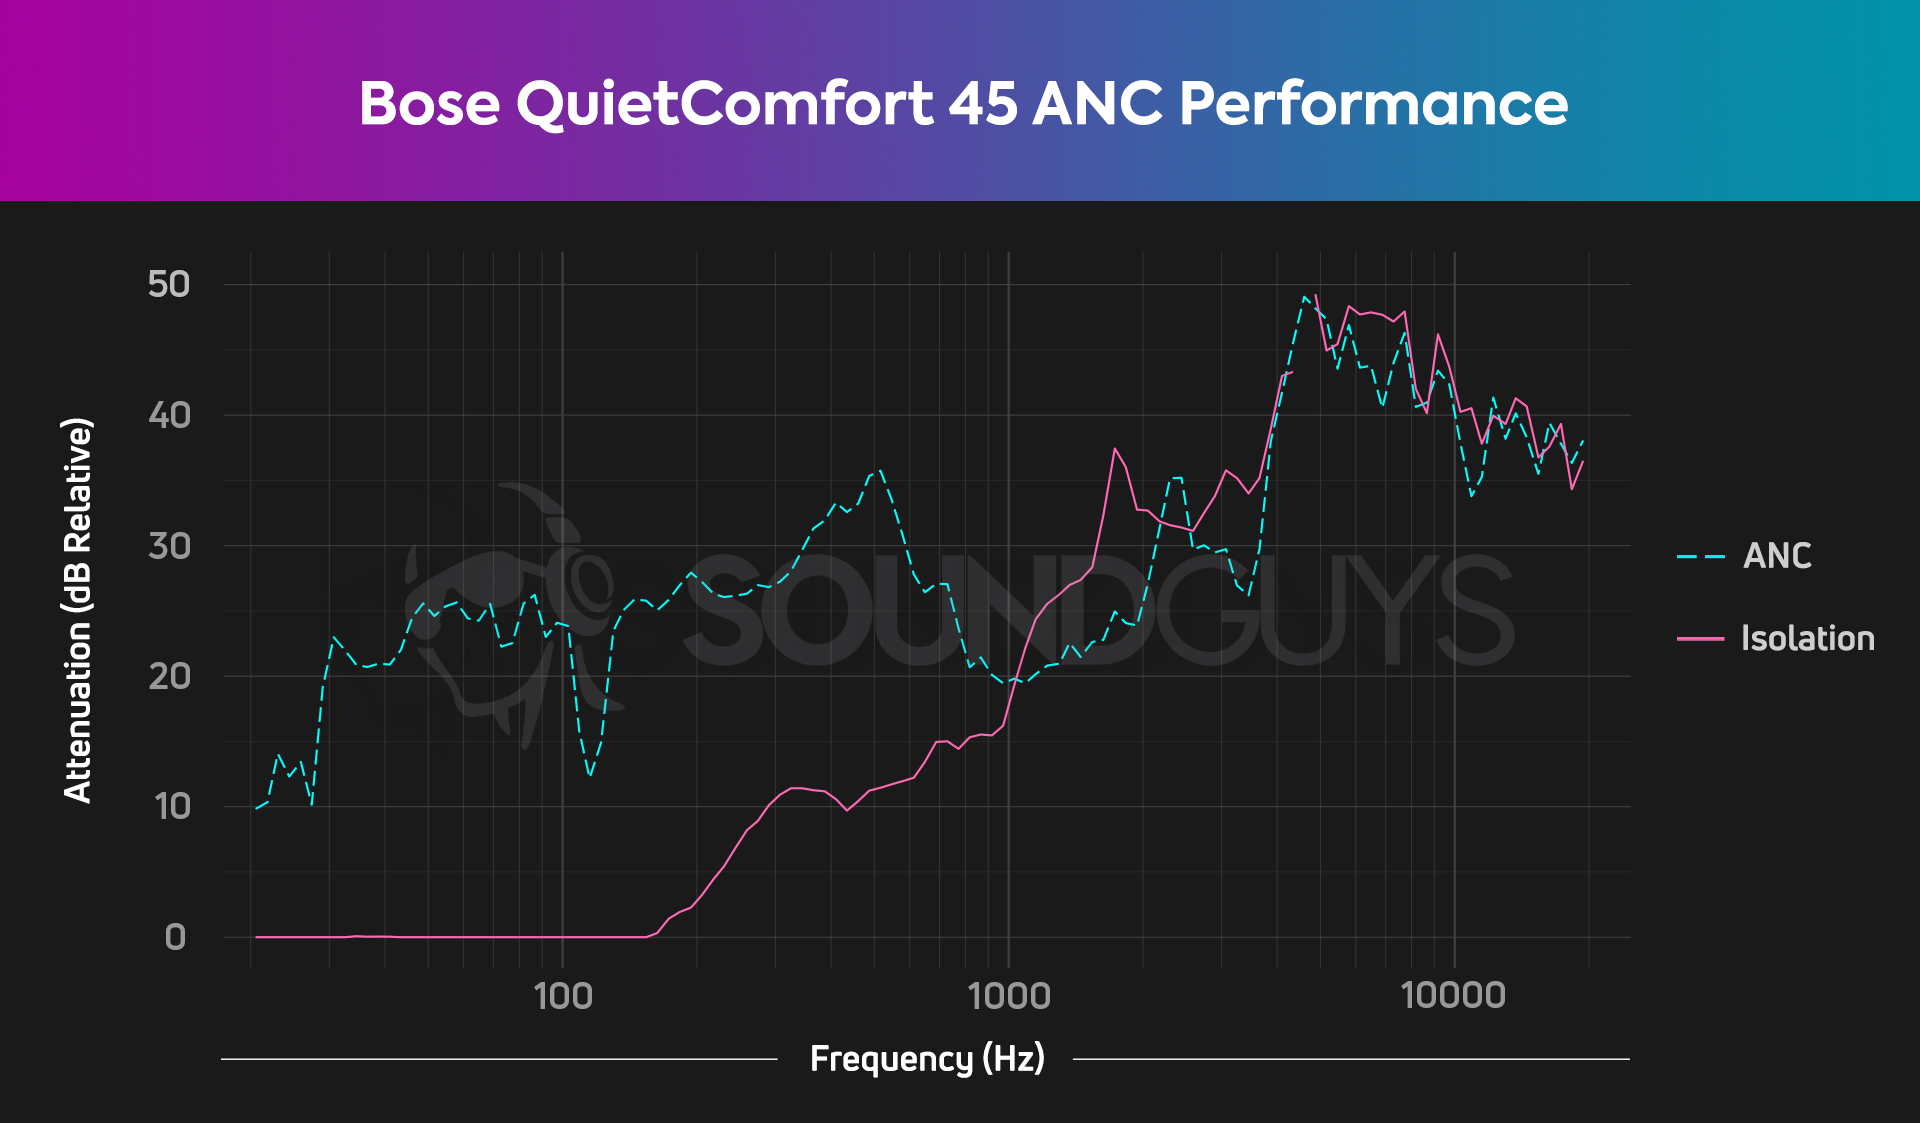 A chart showing the Bose QuietComfort 45's isolation and active noise canceling performance. The moderately high isolation and very high ANC performance holds well through all frequencies.